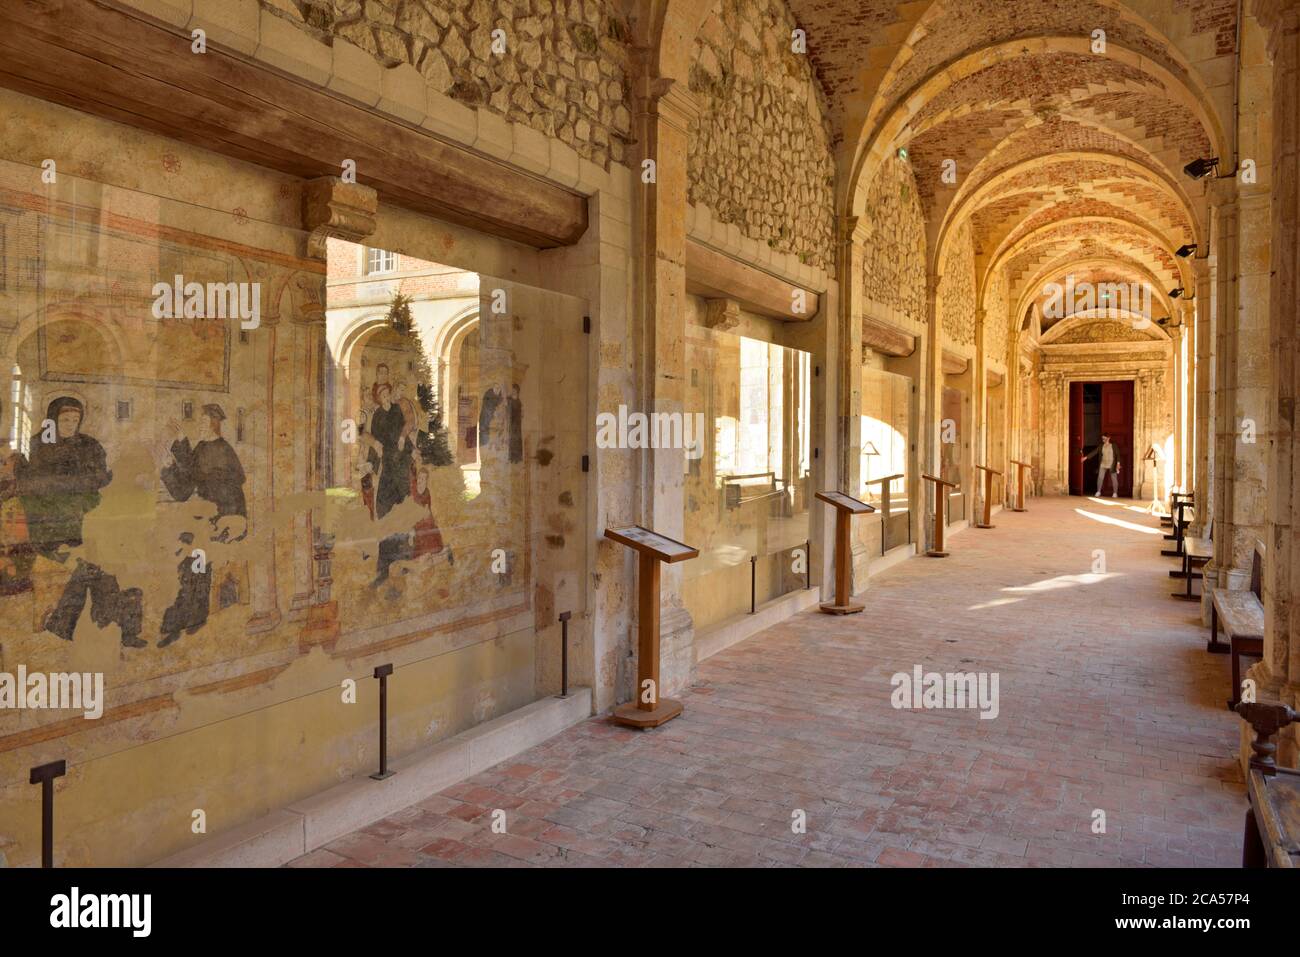 France, Aisne, Thierache,Saint Michel, abbey, walking alley in the cloister with frescoes of the life of Saint Benedict in restoration Stock Photo